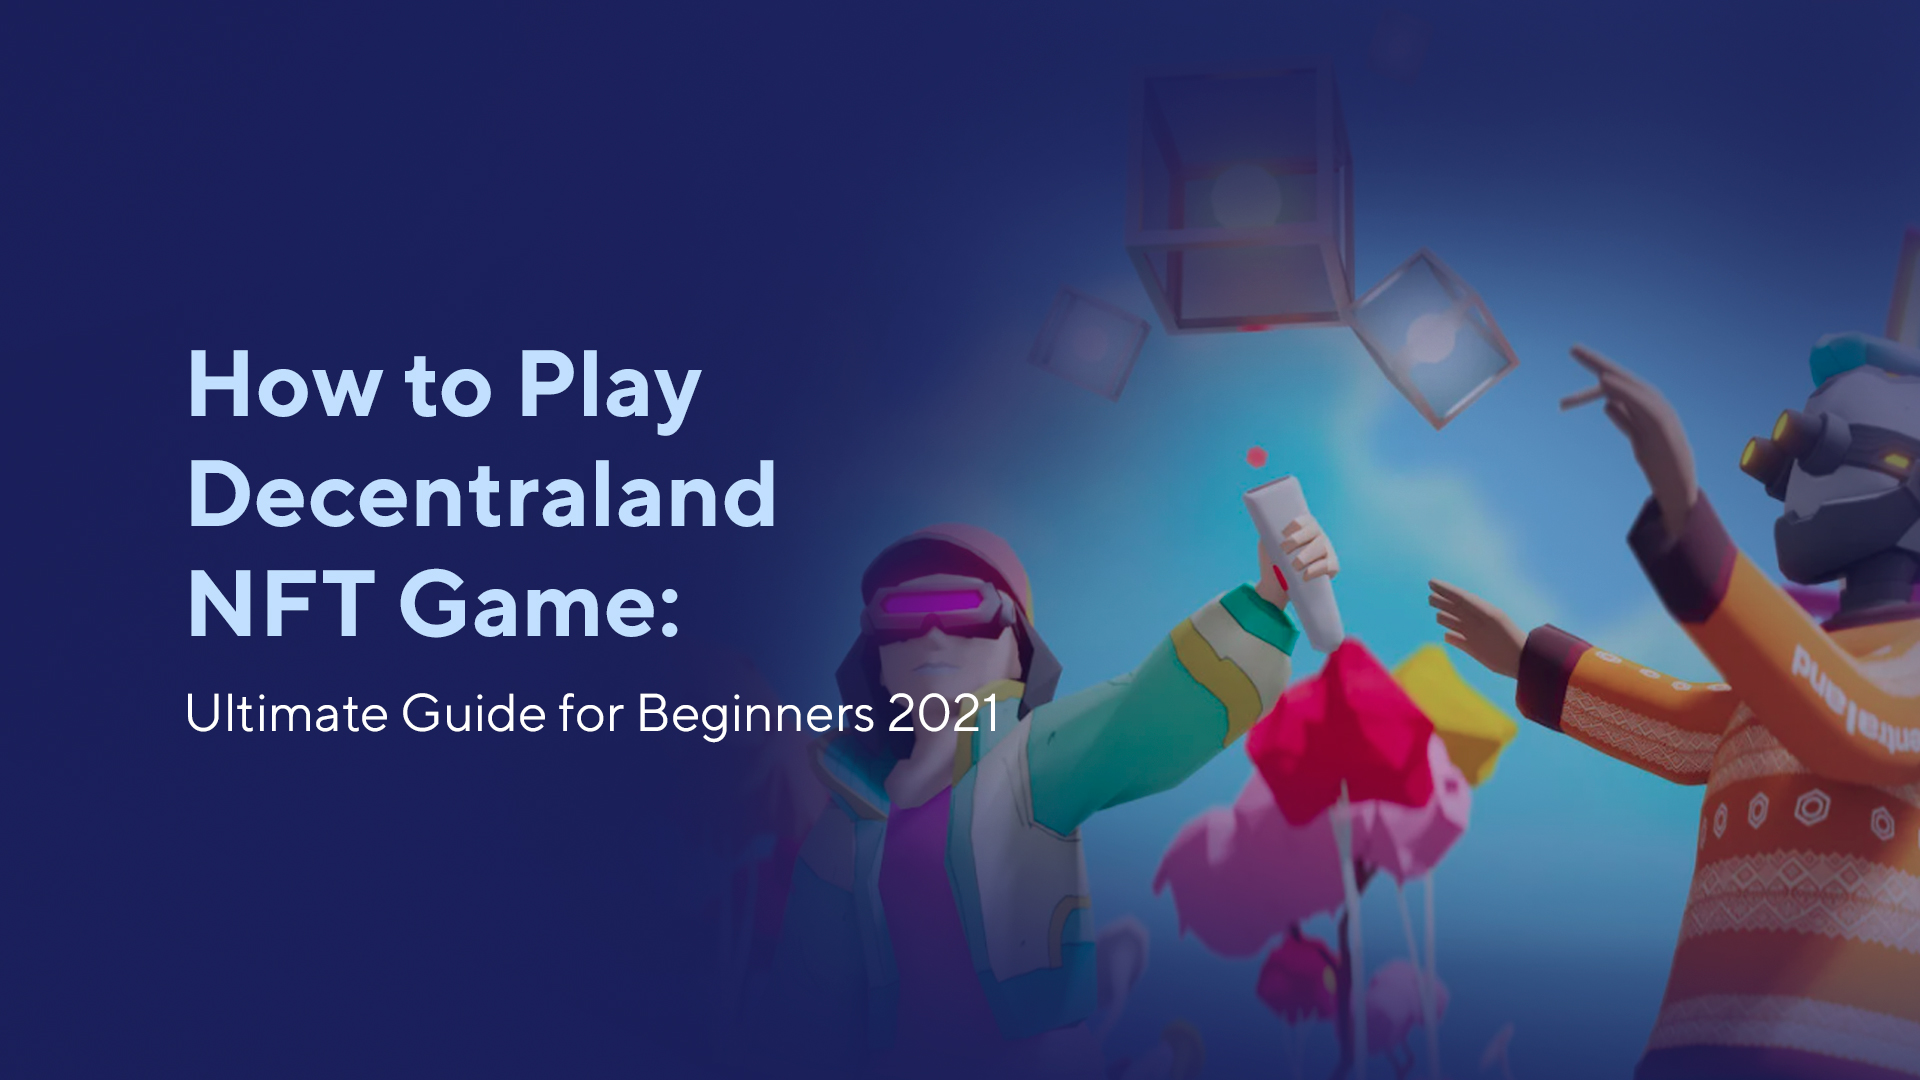 How to Play Decentraland NFT Game: Ultimate Guide for Beginners 2022